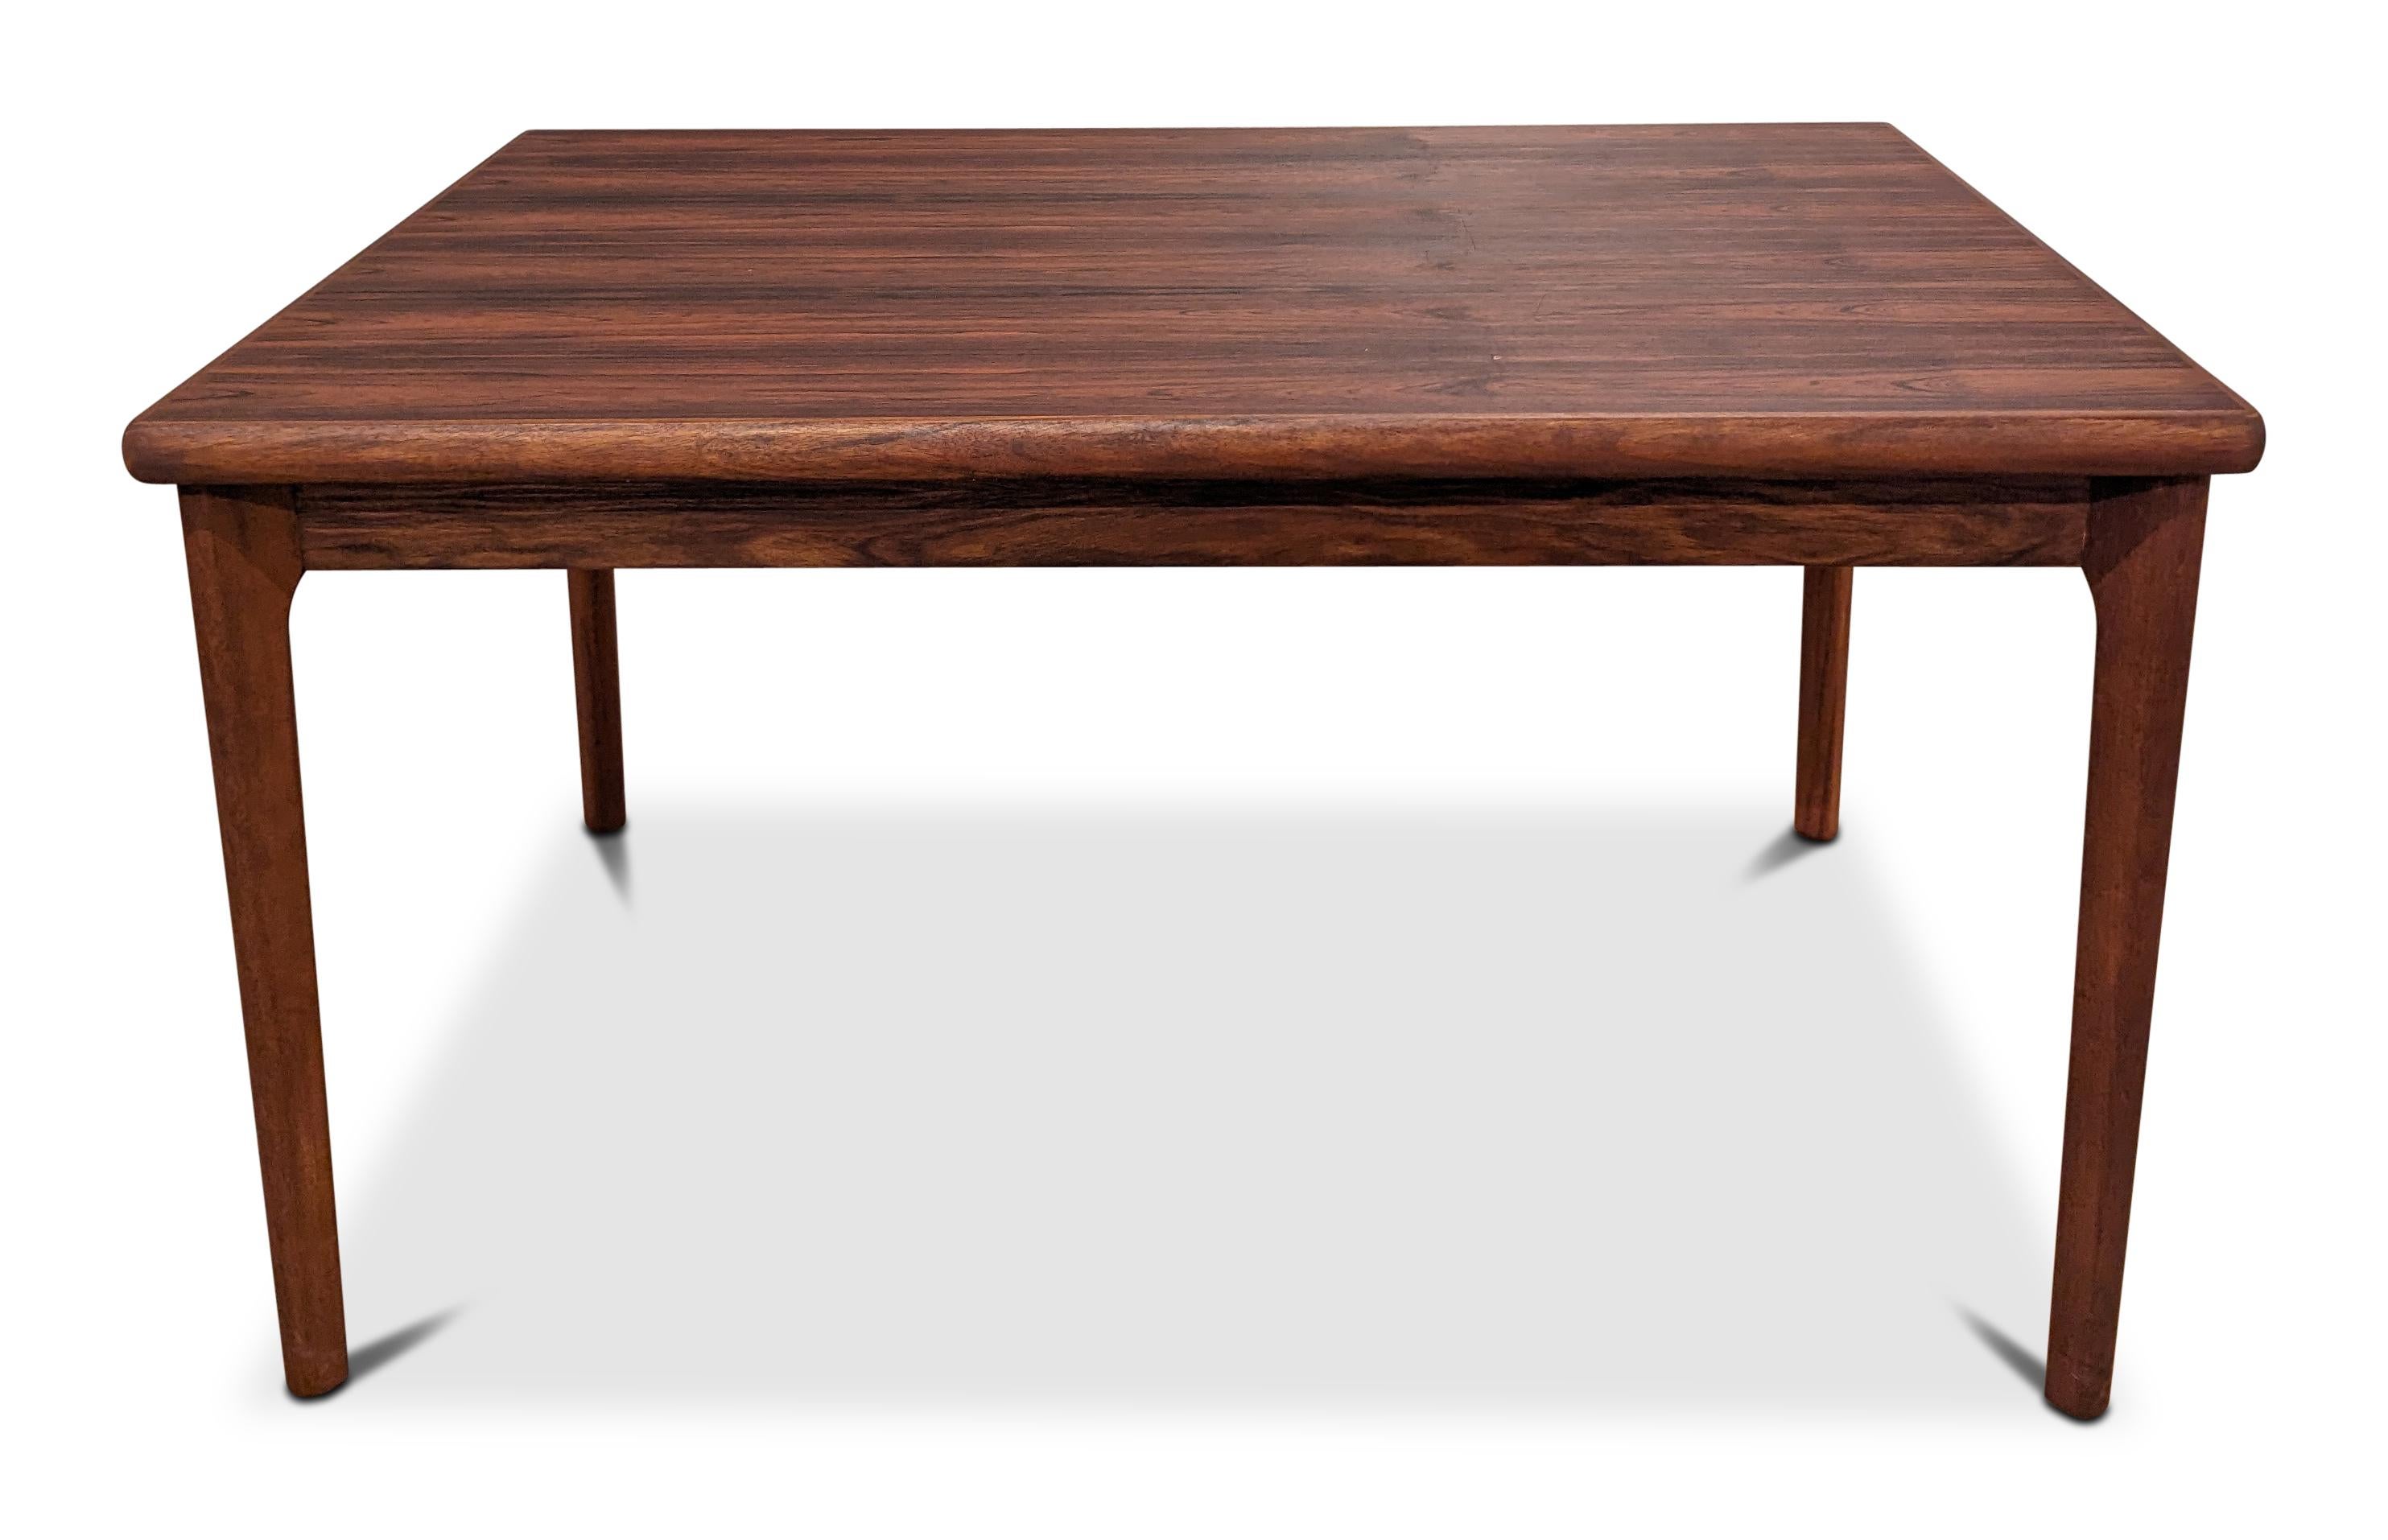 Henry Kjernulf Rosewood Dining Table - 022405 Vintage Danish In Good Condition For Sale In Jersey City, NJ